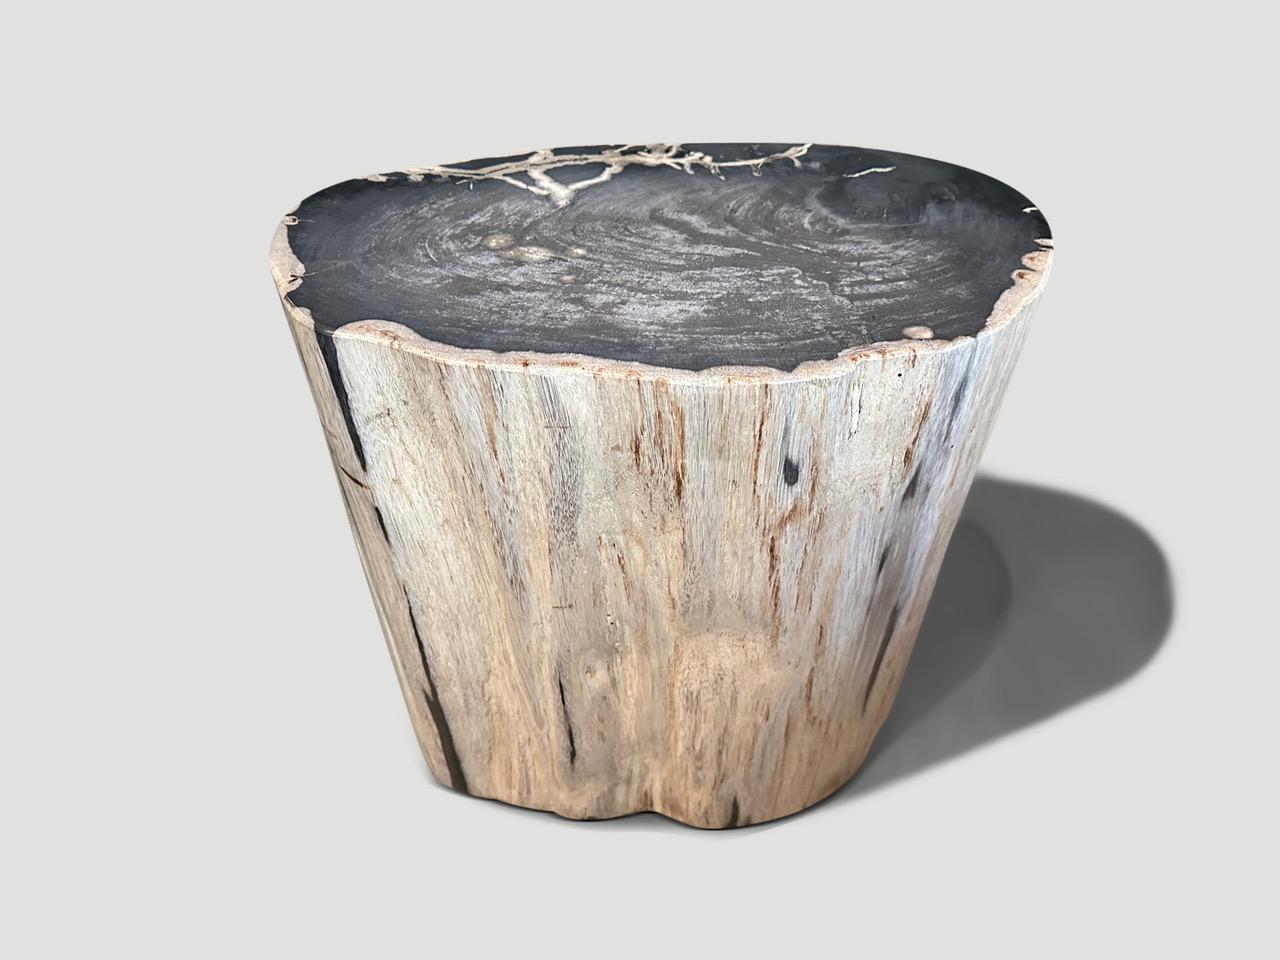 Impressive beautiful contrasting tones on this high quality super smooth petrified wood side table. It’s fascinating how Mother Nature produces these stunning 40 million year old petrified teak logs with such contrasting colors and natural patterns